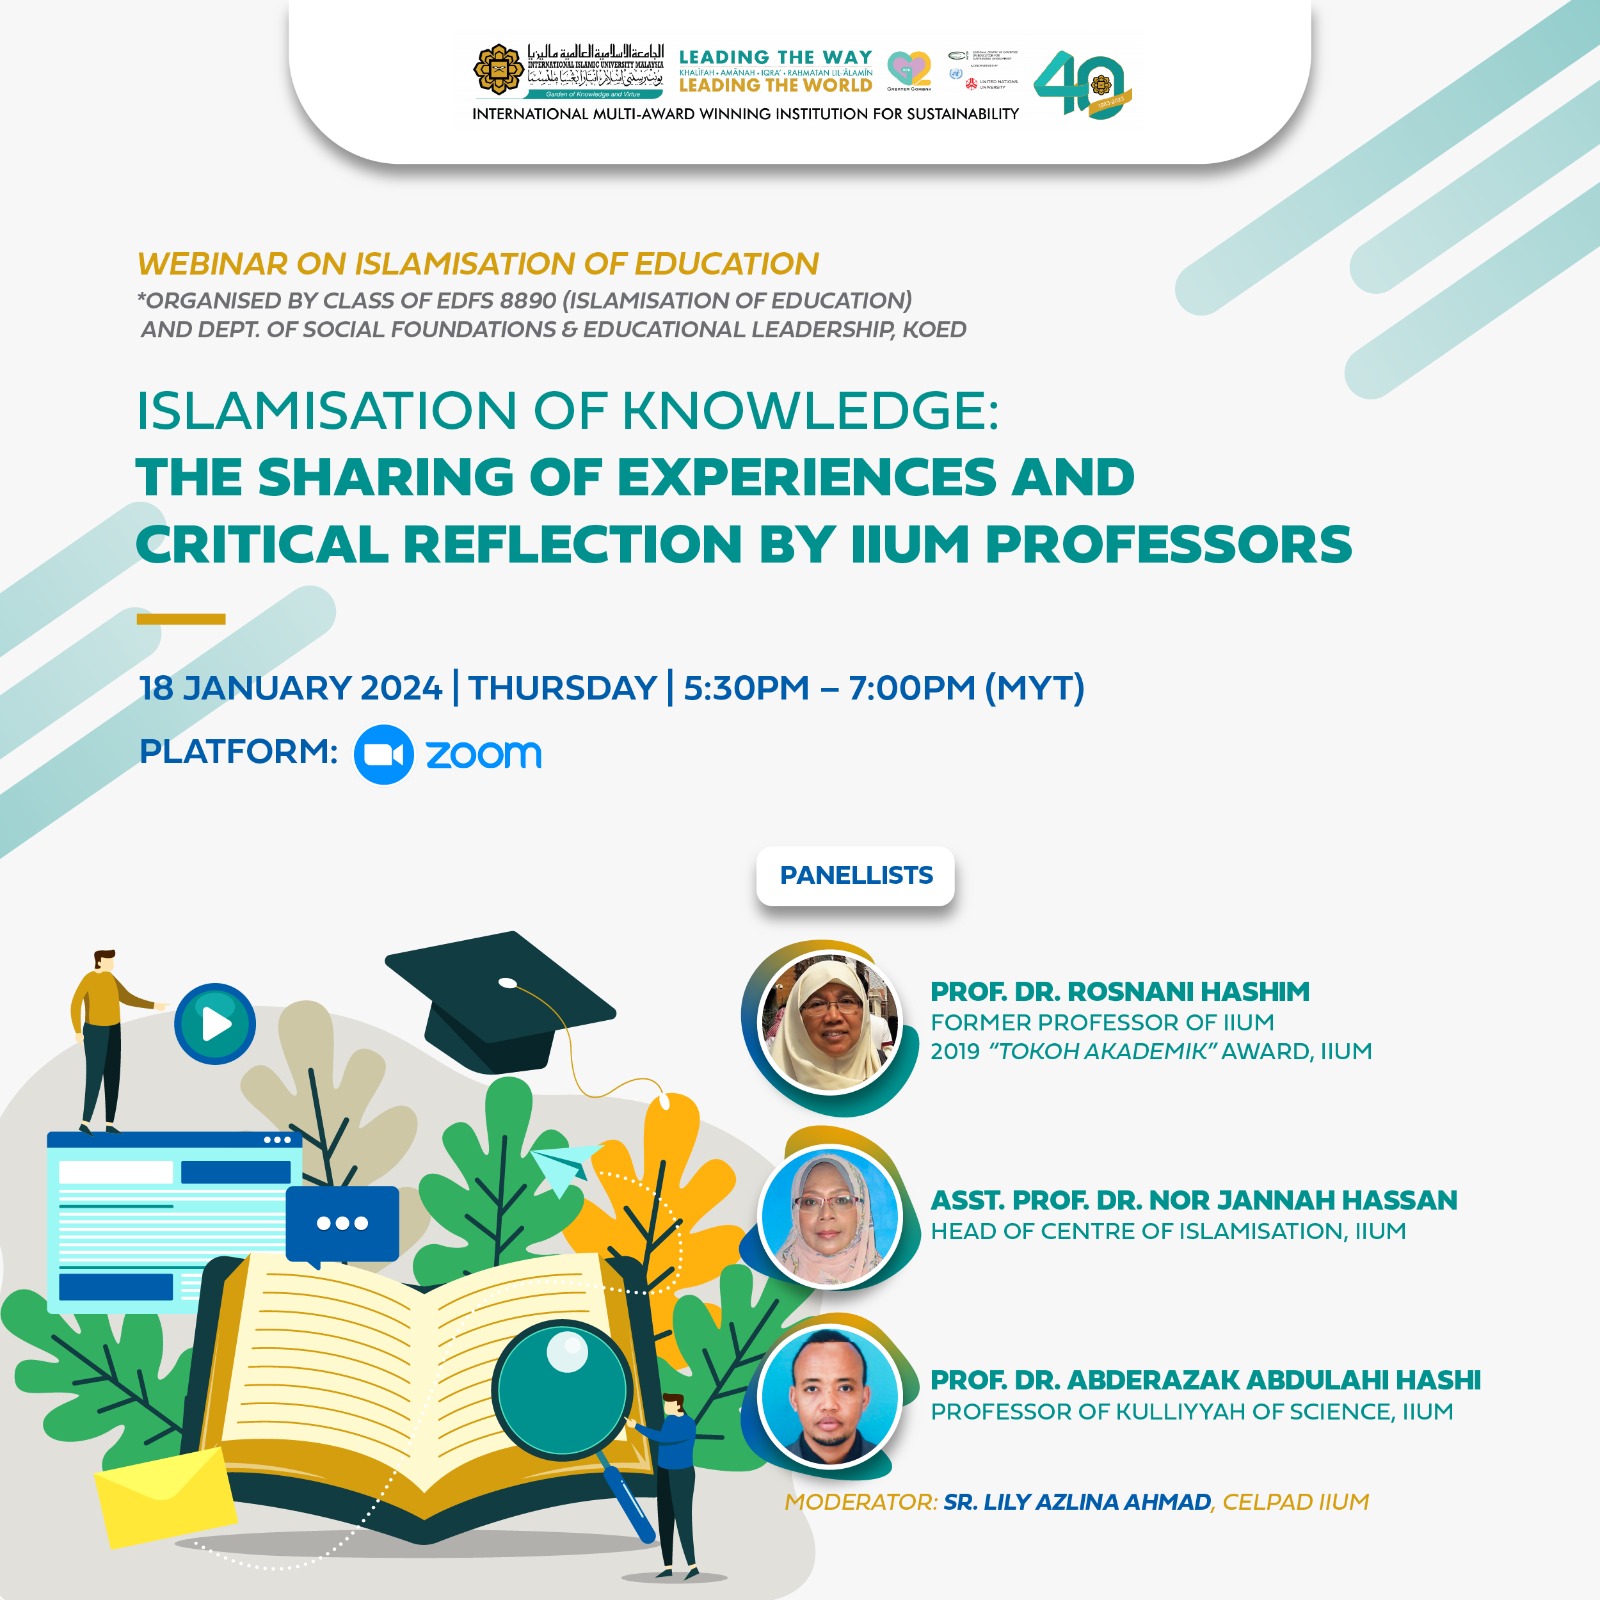 ISLAMISATION OF KNOWLEDGE: THE SHARING OF EXPERIENCES AND CRITICAL REFLECTION BY IIUM PROFESSORS